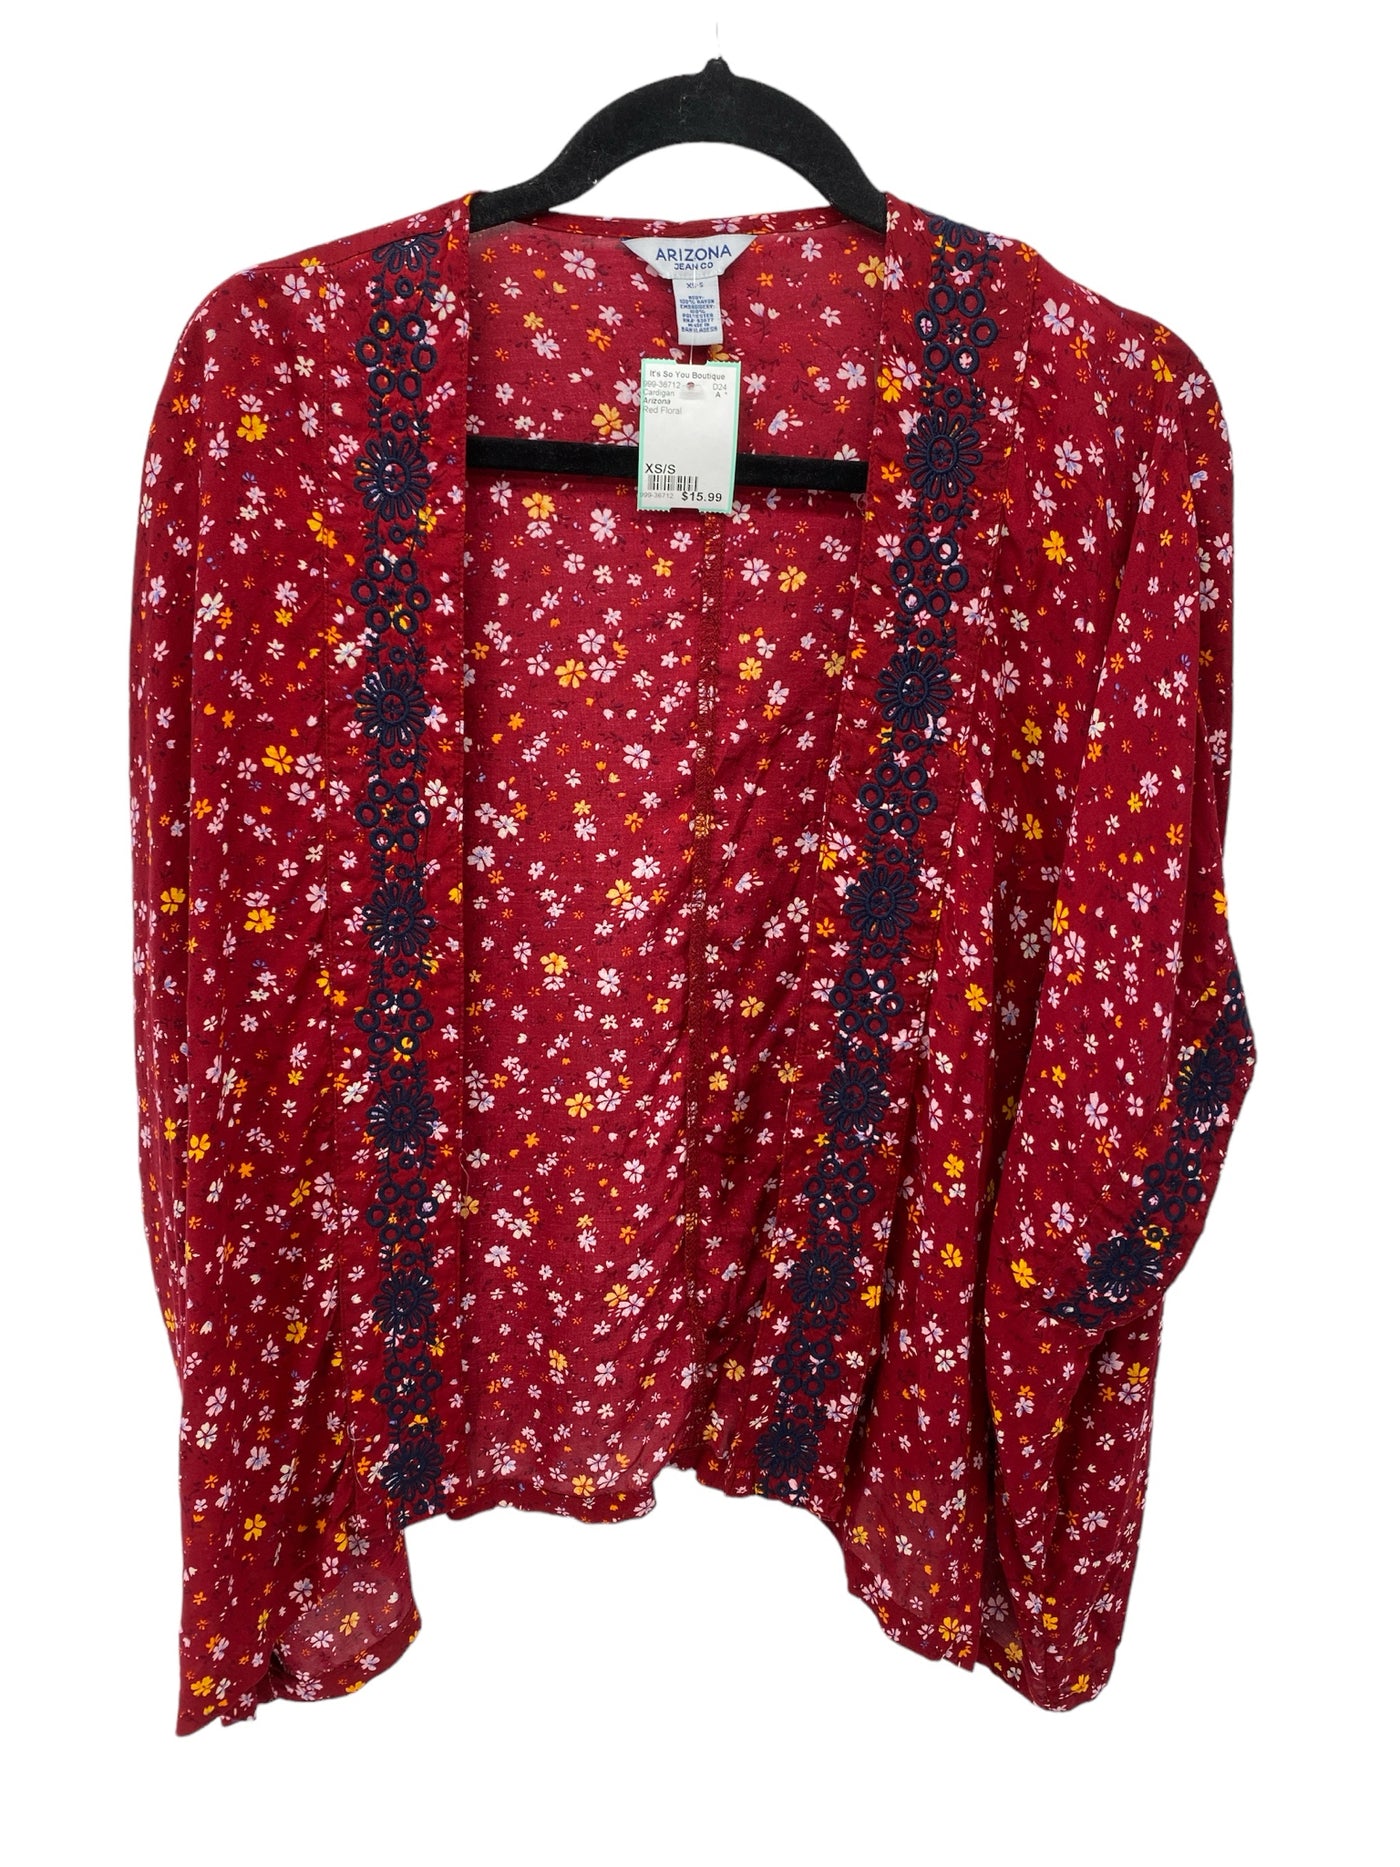 Arizona Misses Size XS/S Red Floral Cardigan